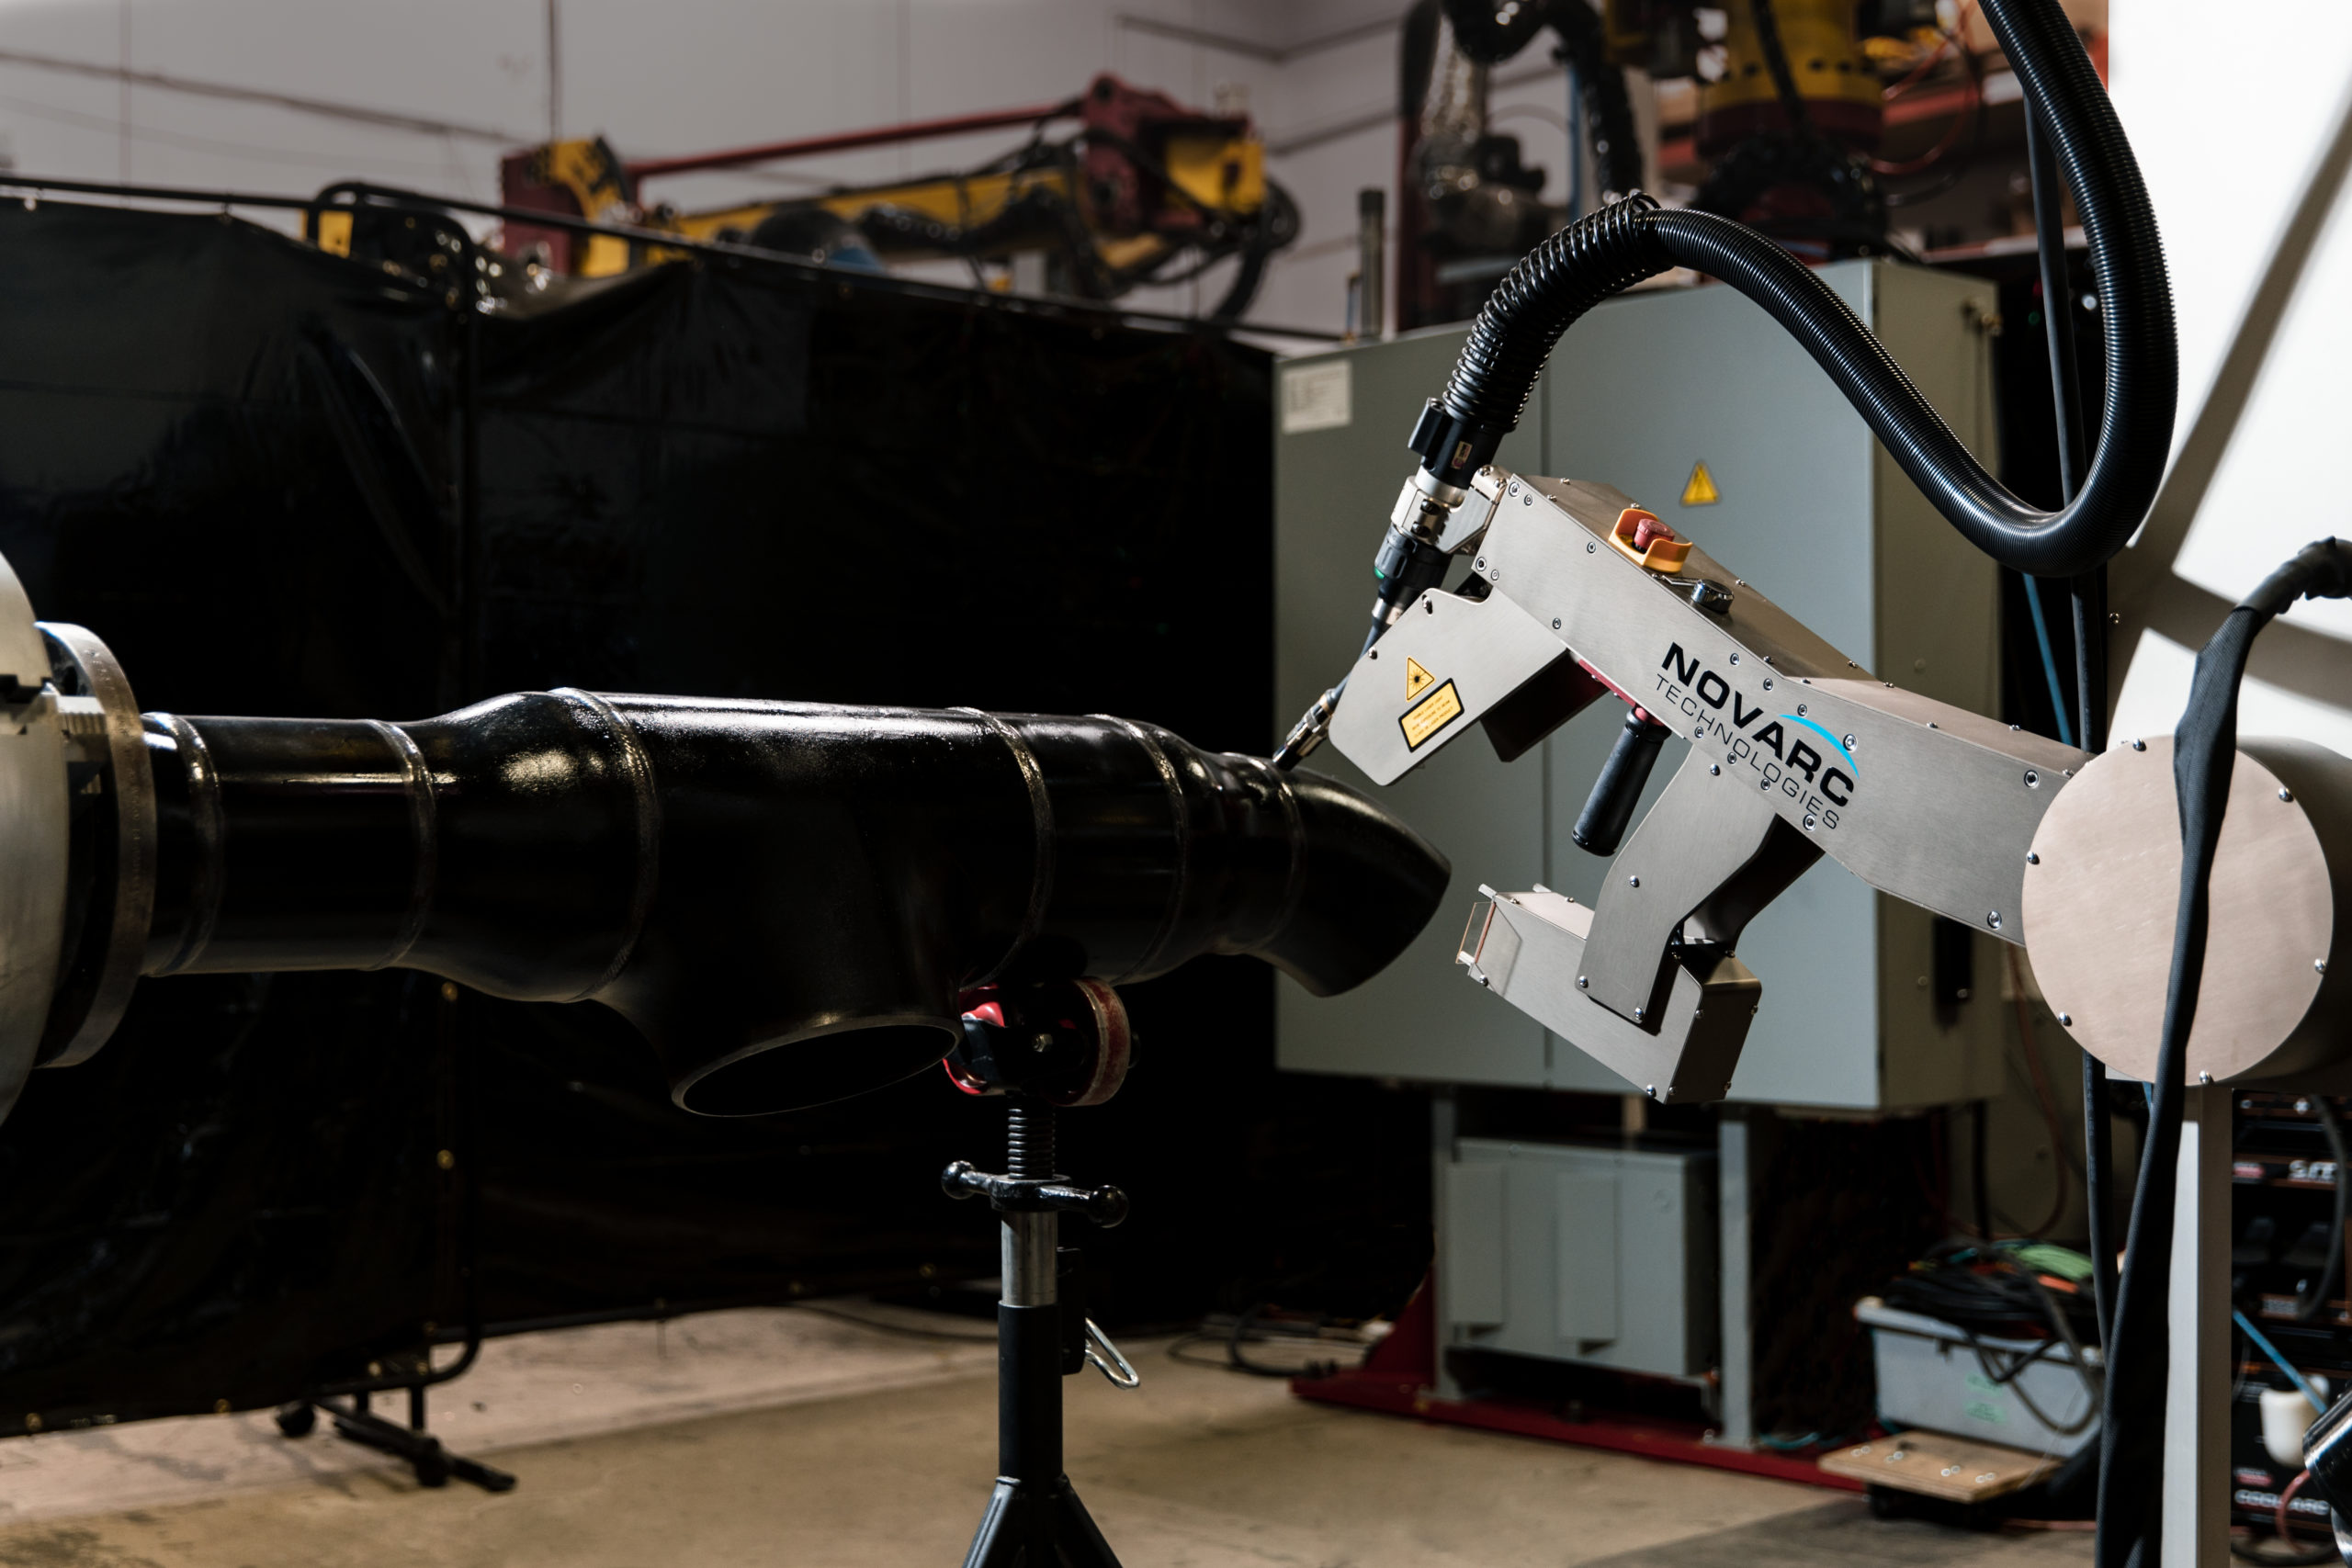 Your Questions Answered about the Spool Welding Robot